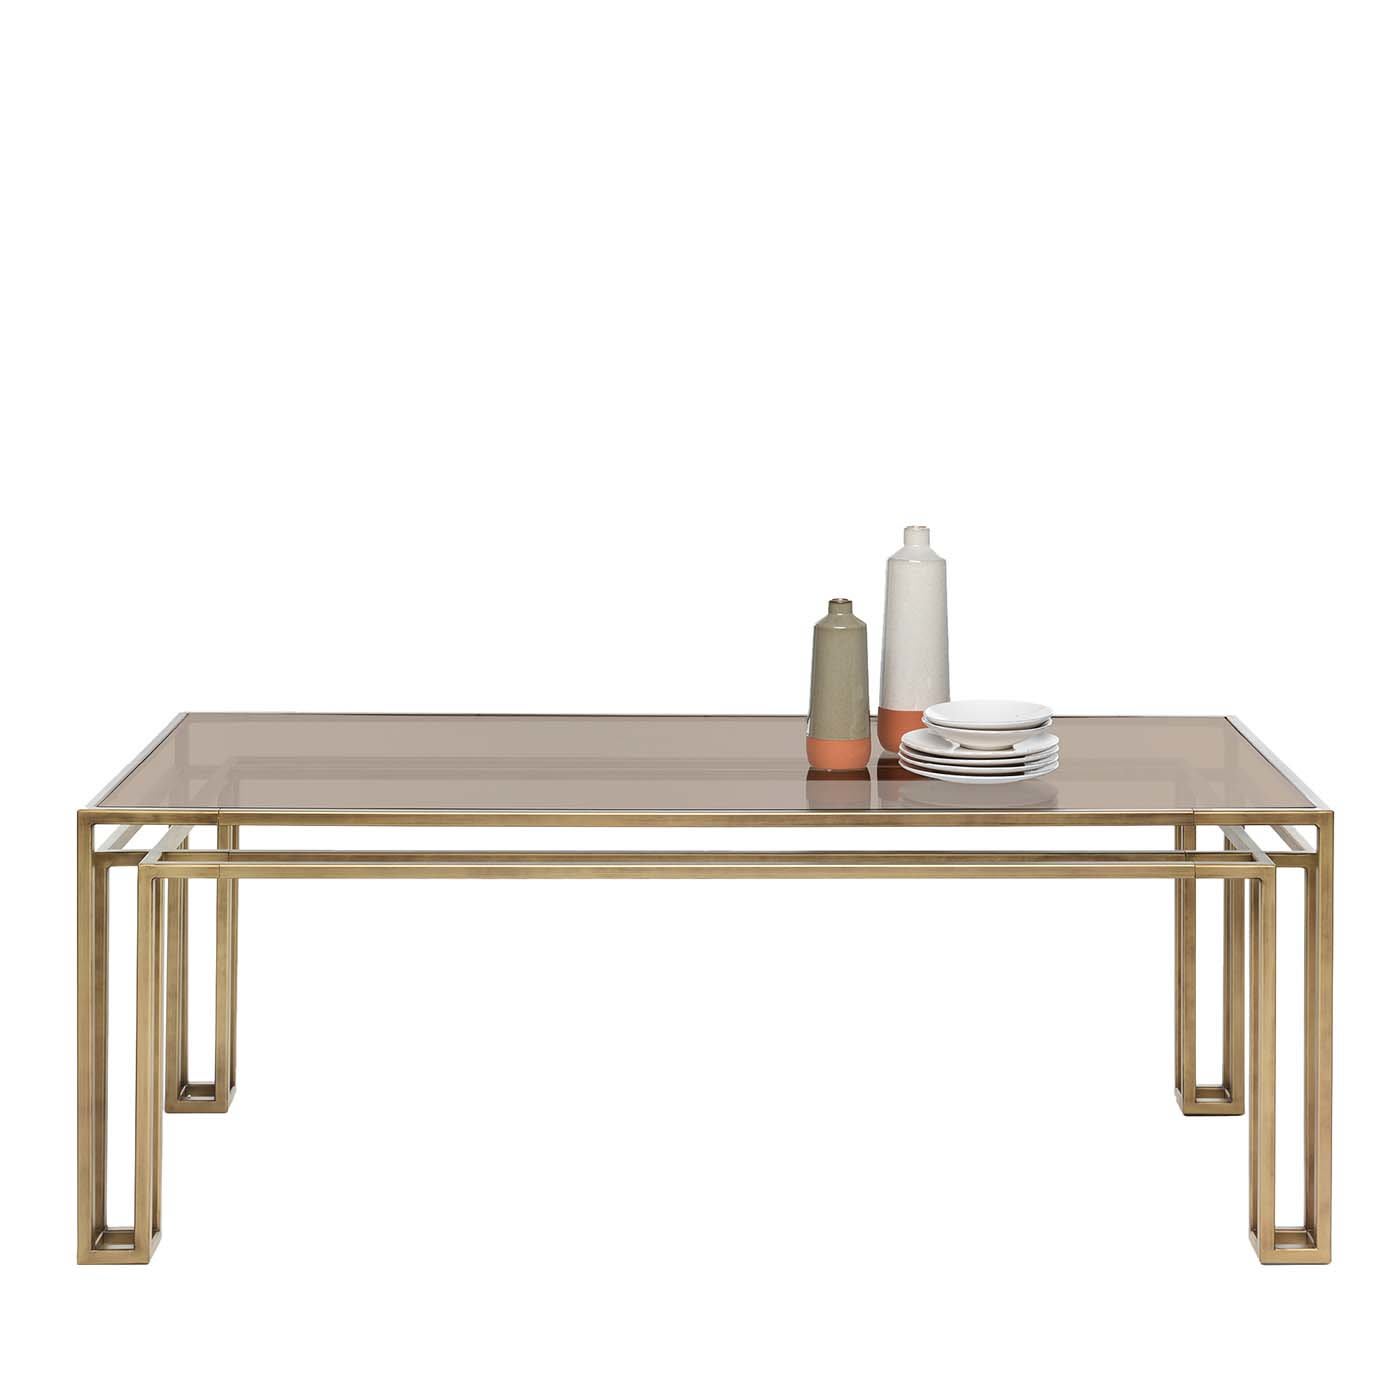 Hotline Bronze Dining Table - Mogg